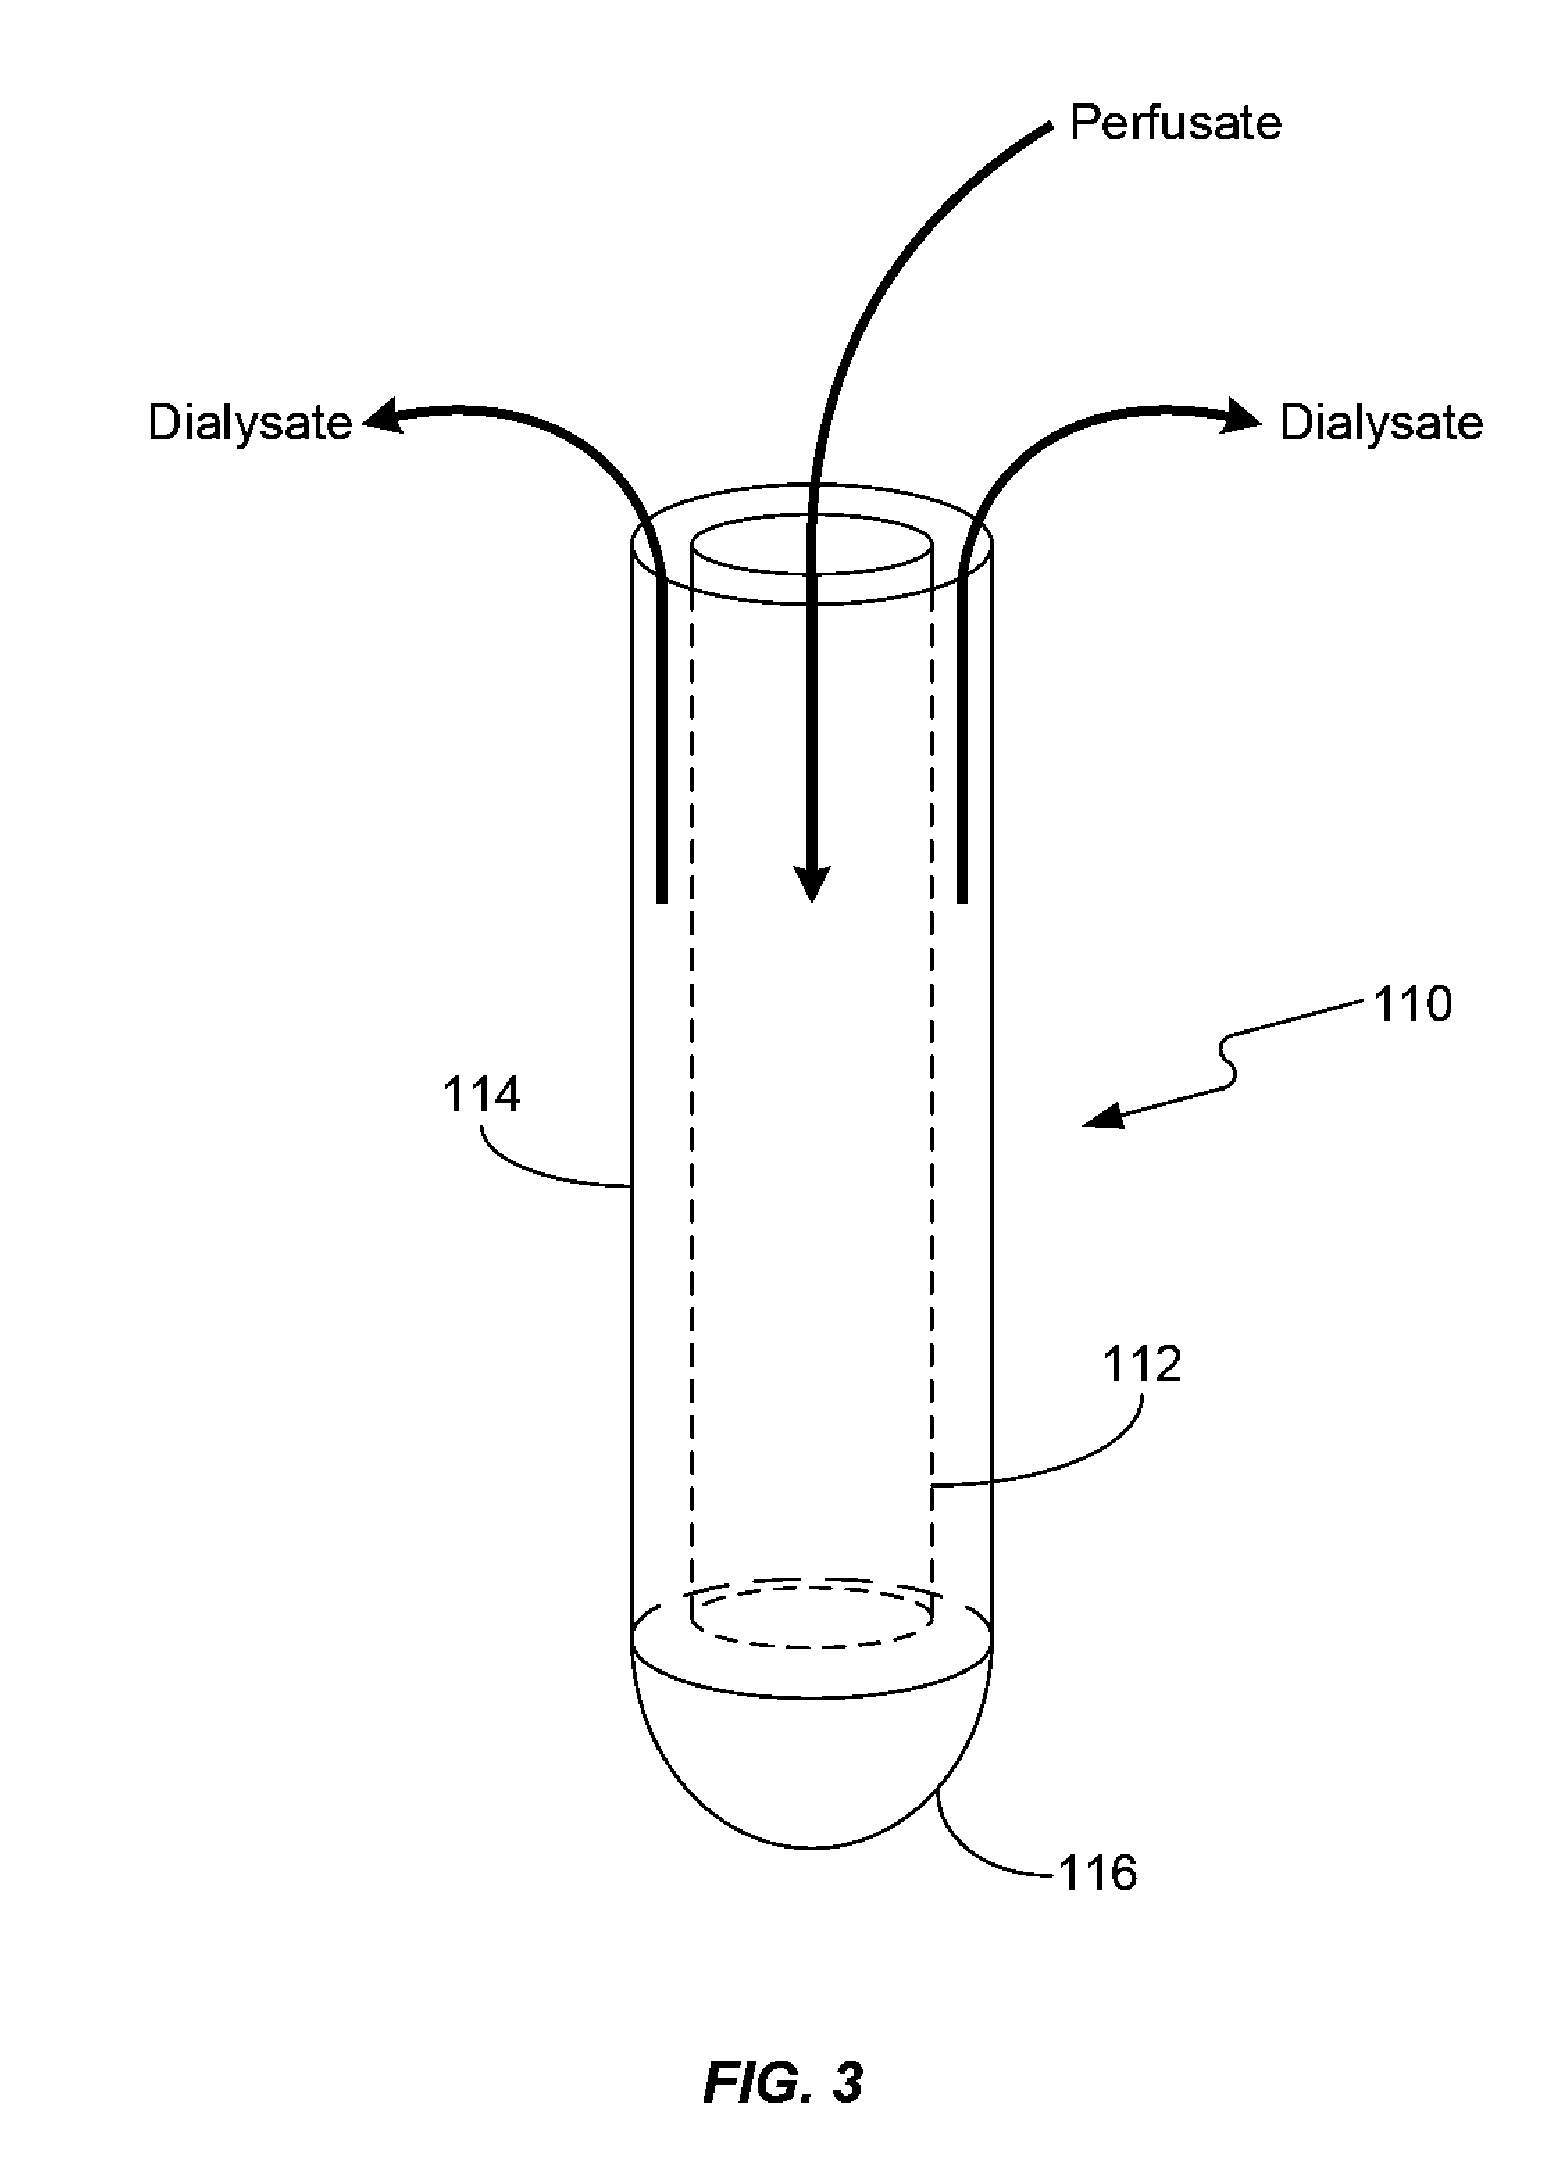 Systems and methods for in vivo measurement of interstitial biological activity, processes and/or compositions